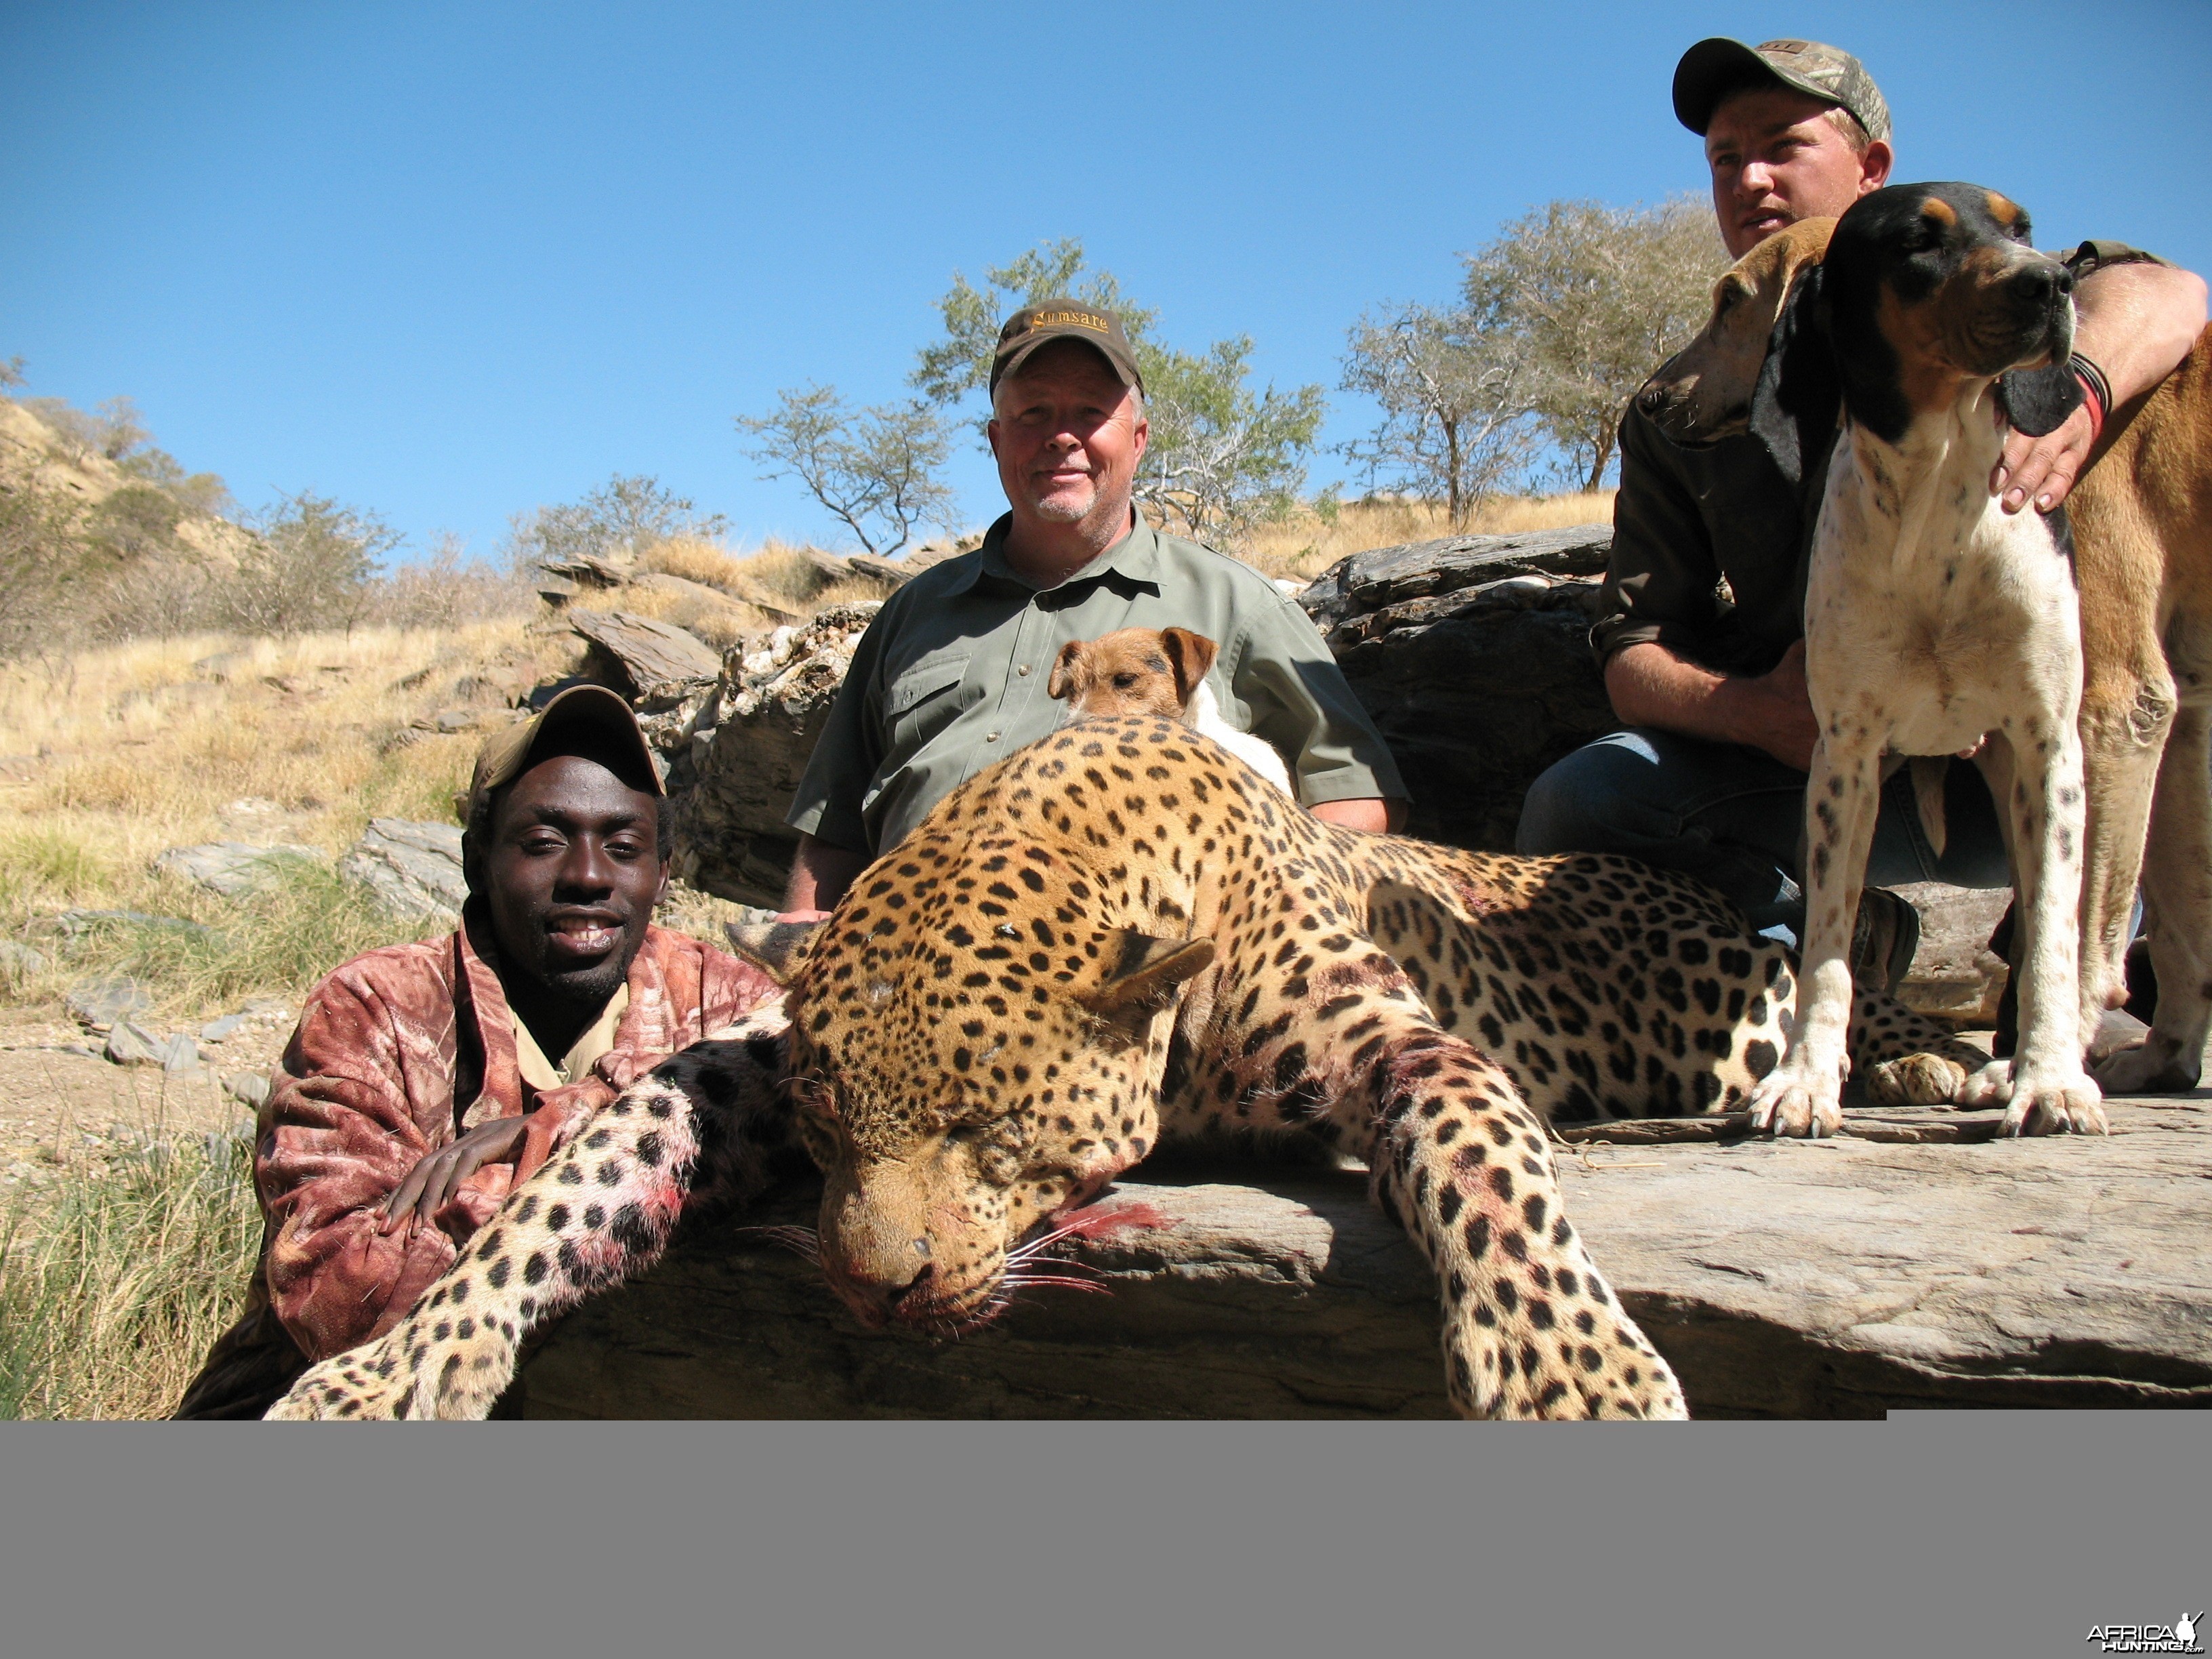 Brad Smith from Texas with Monster Leopard in Namibia